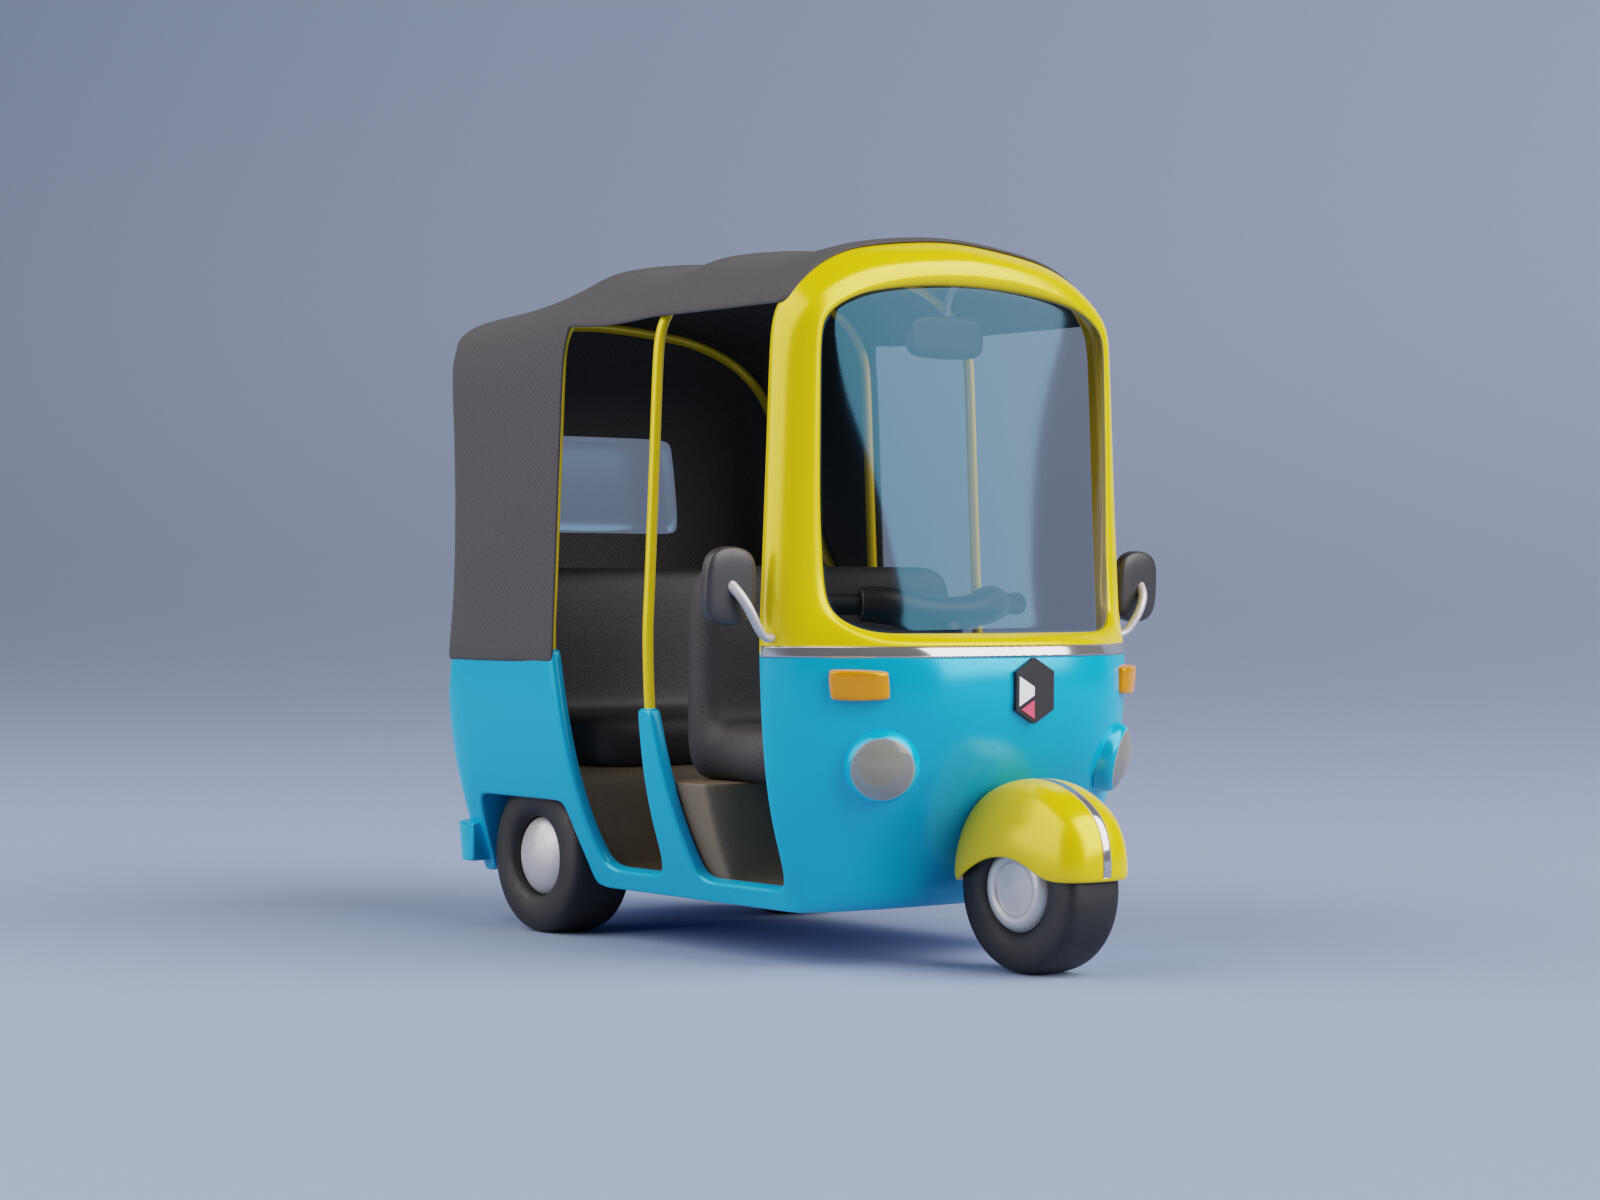 Showcase of 3D library of various 3D characters with 3D vehicles